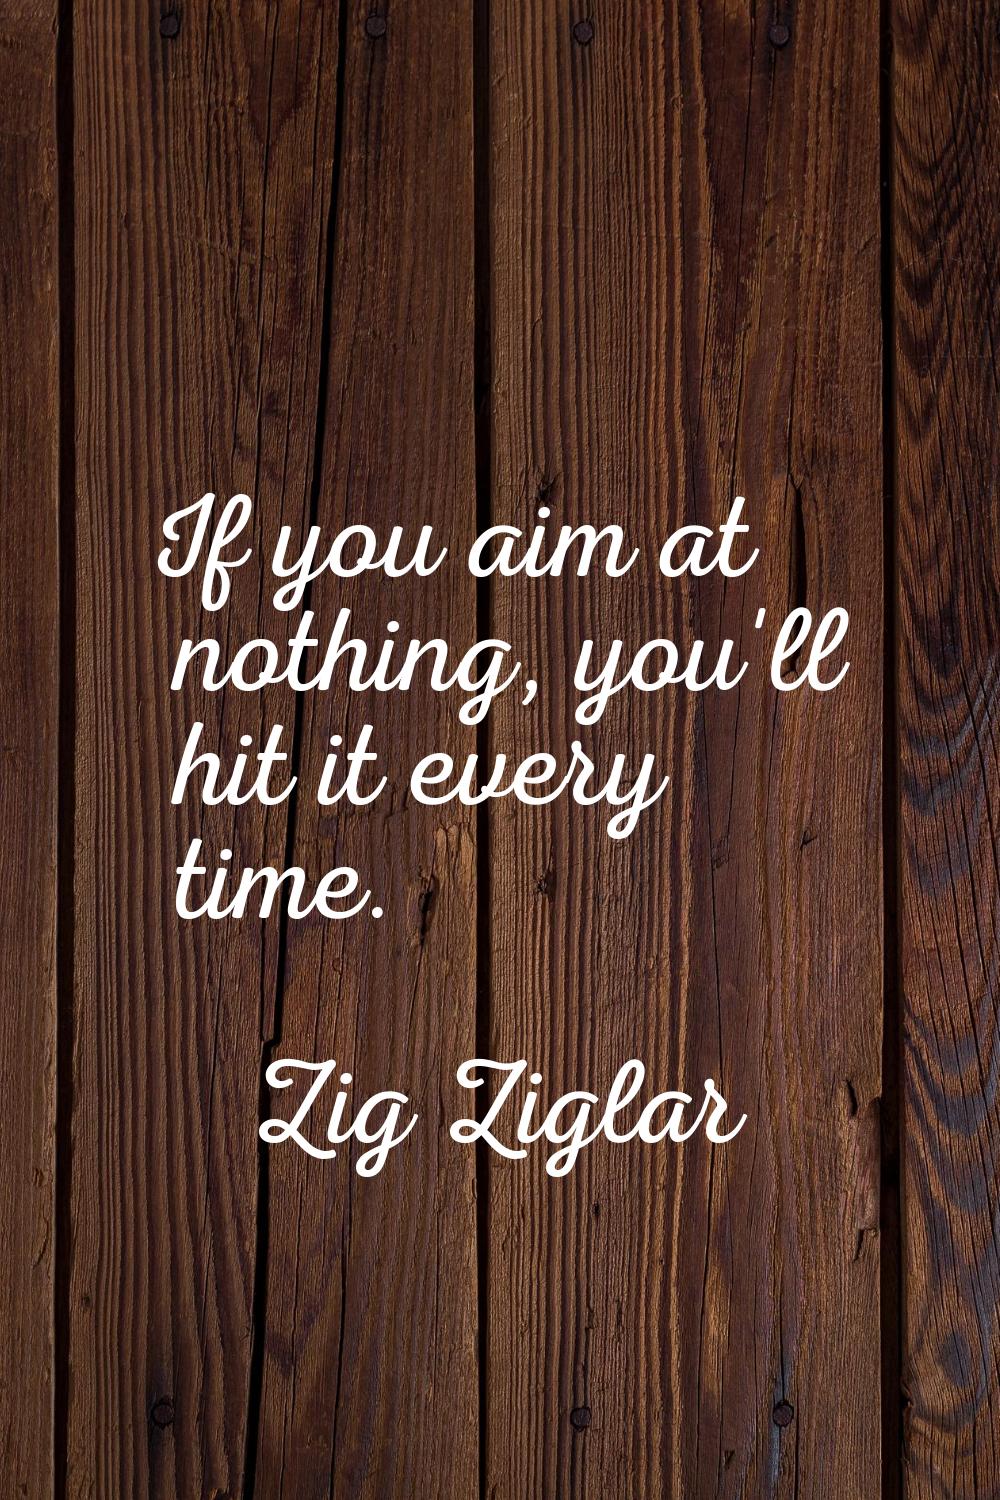 If you aim at nothing, you'll hit it every time.